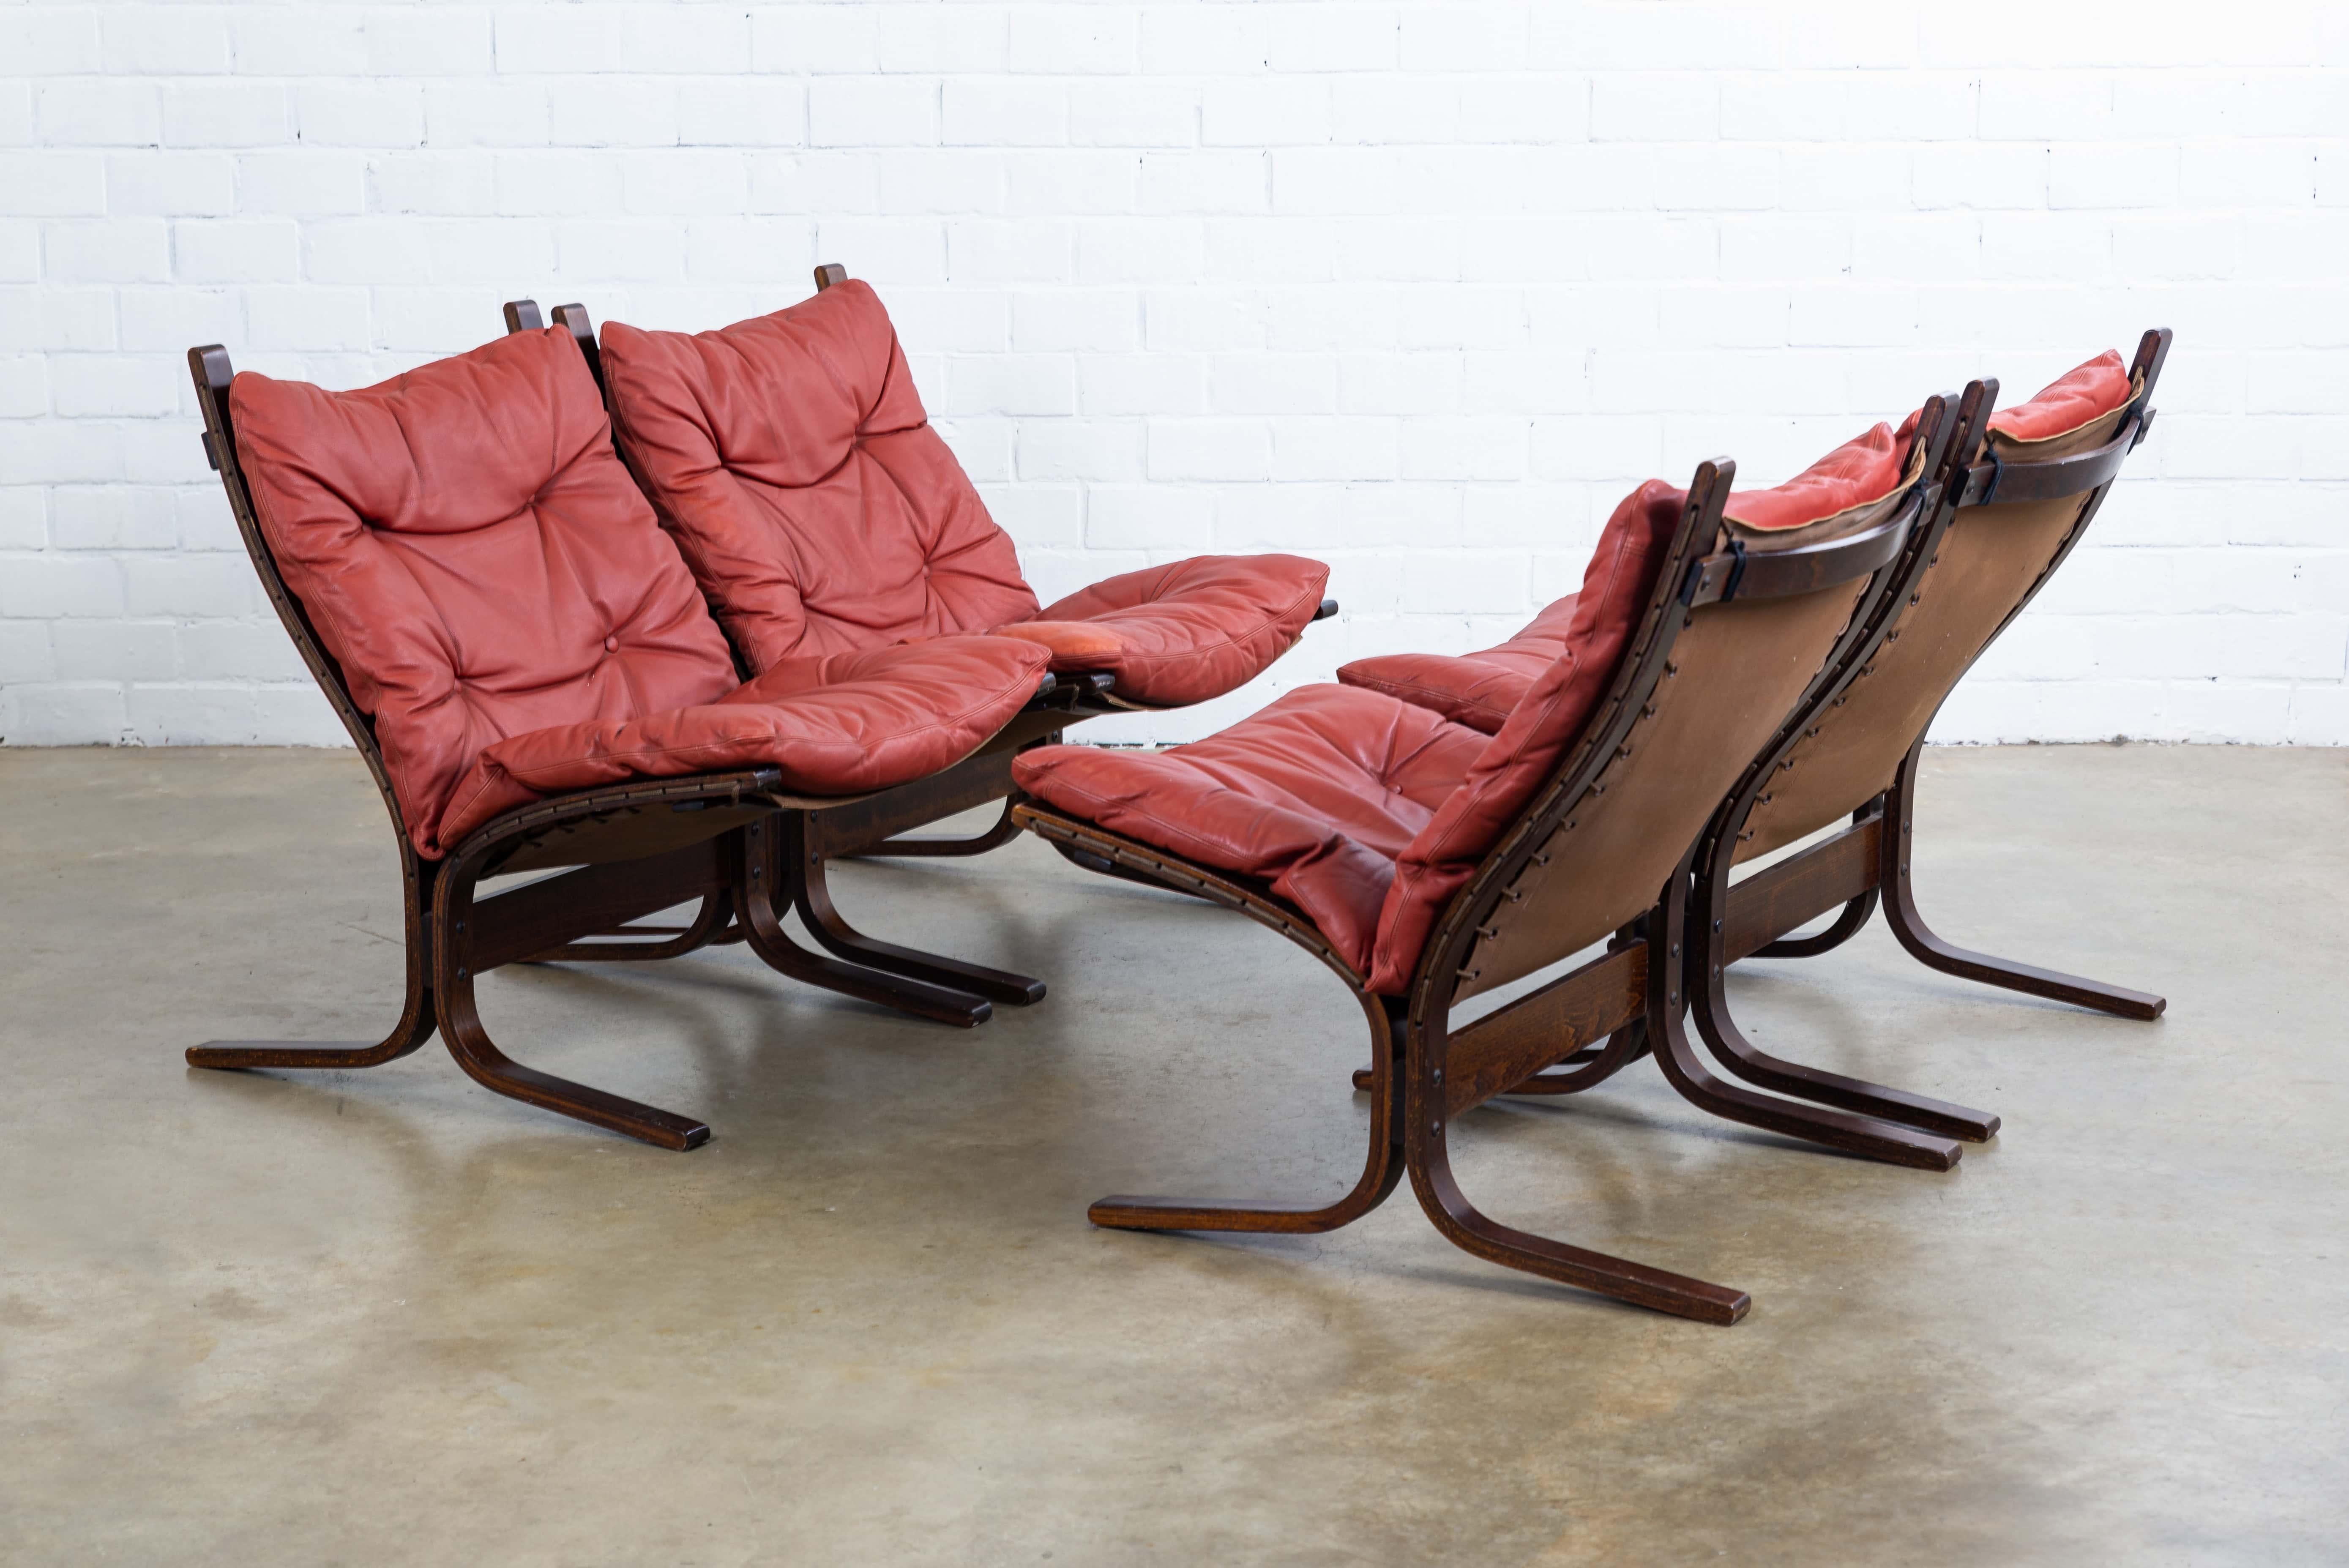 Nice set of lounge chairs designed by Ingmar Relling, Norway.
Original version in beautiful vintage condition.